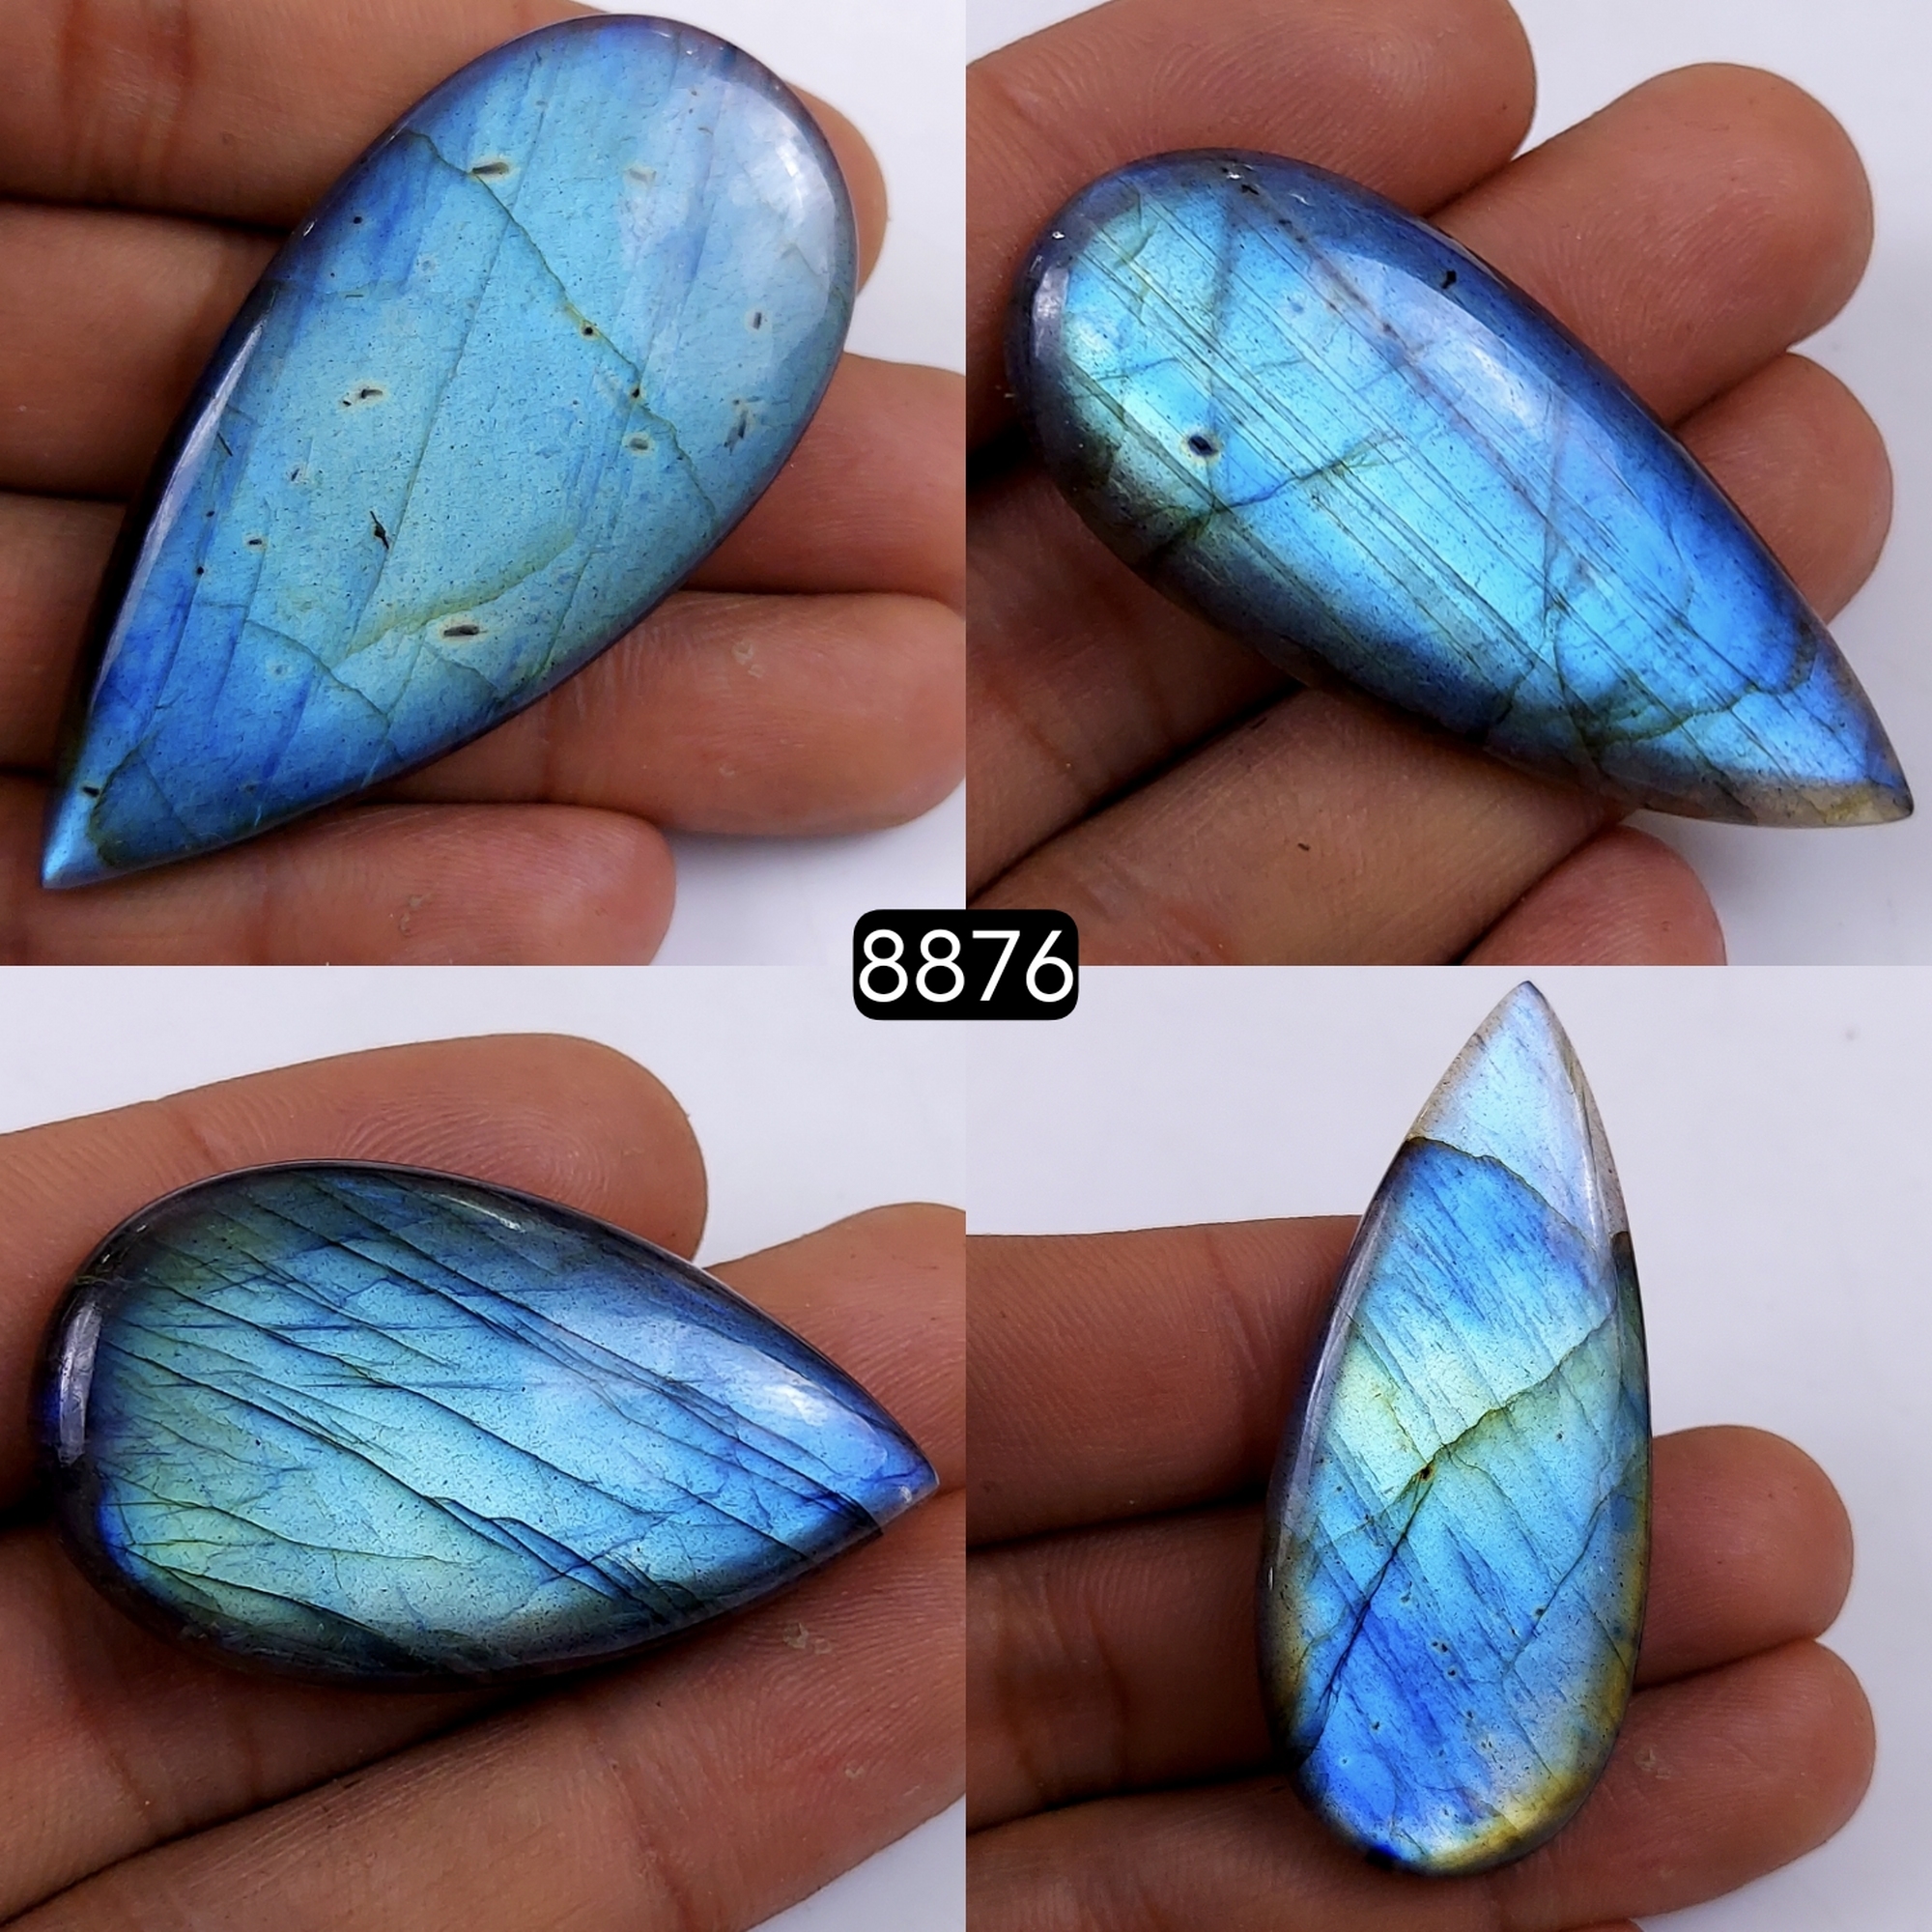 4Pcs 296Cts  Natural Labradorite Pear Shape Loose Gemstone Cabochon Lot For Jewelry Making 60x28 41x22mm#8876